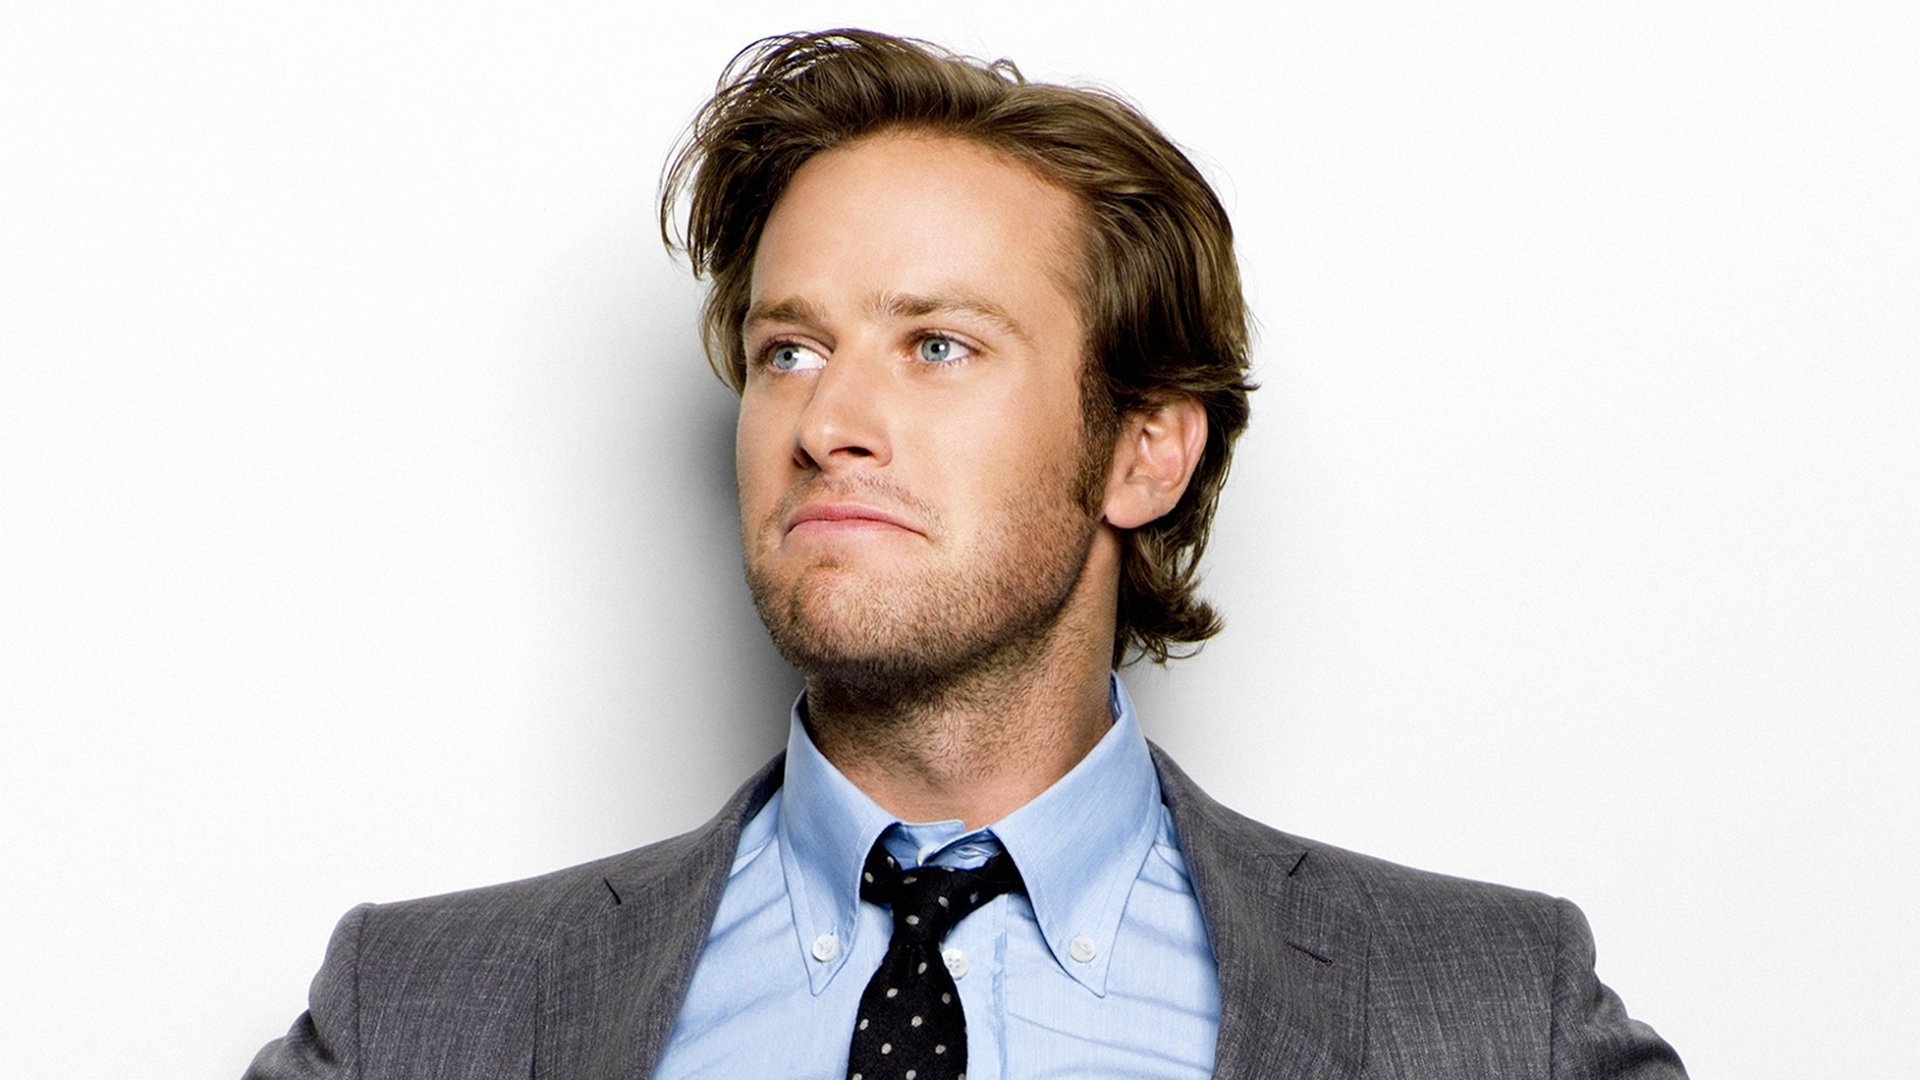 Armie Hammer movies, HD wallpapers, Actor background, High-resolution images, 1920x1080 Full HD Desktop